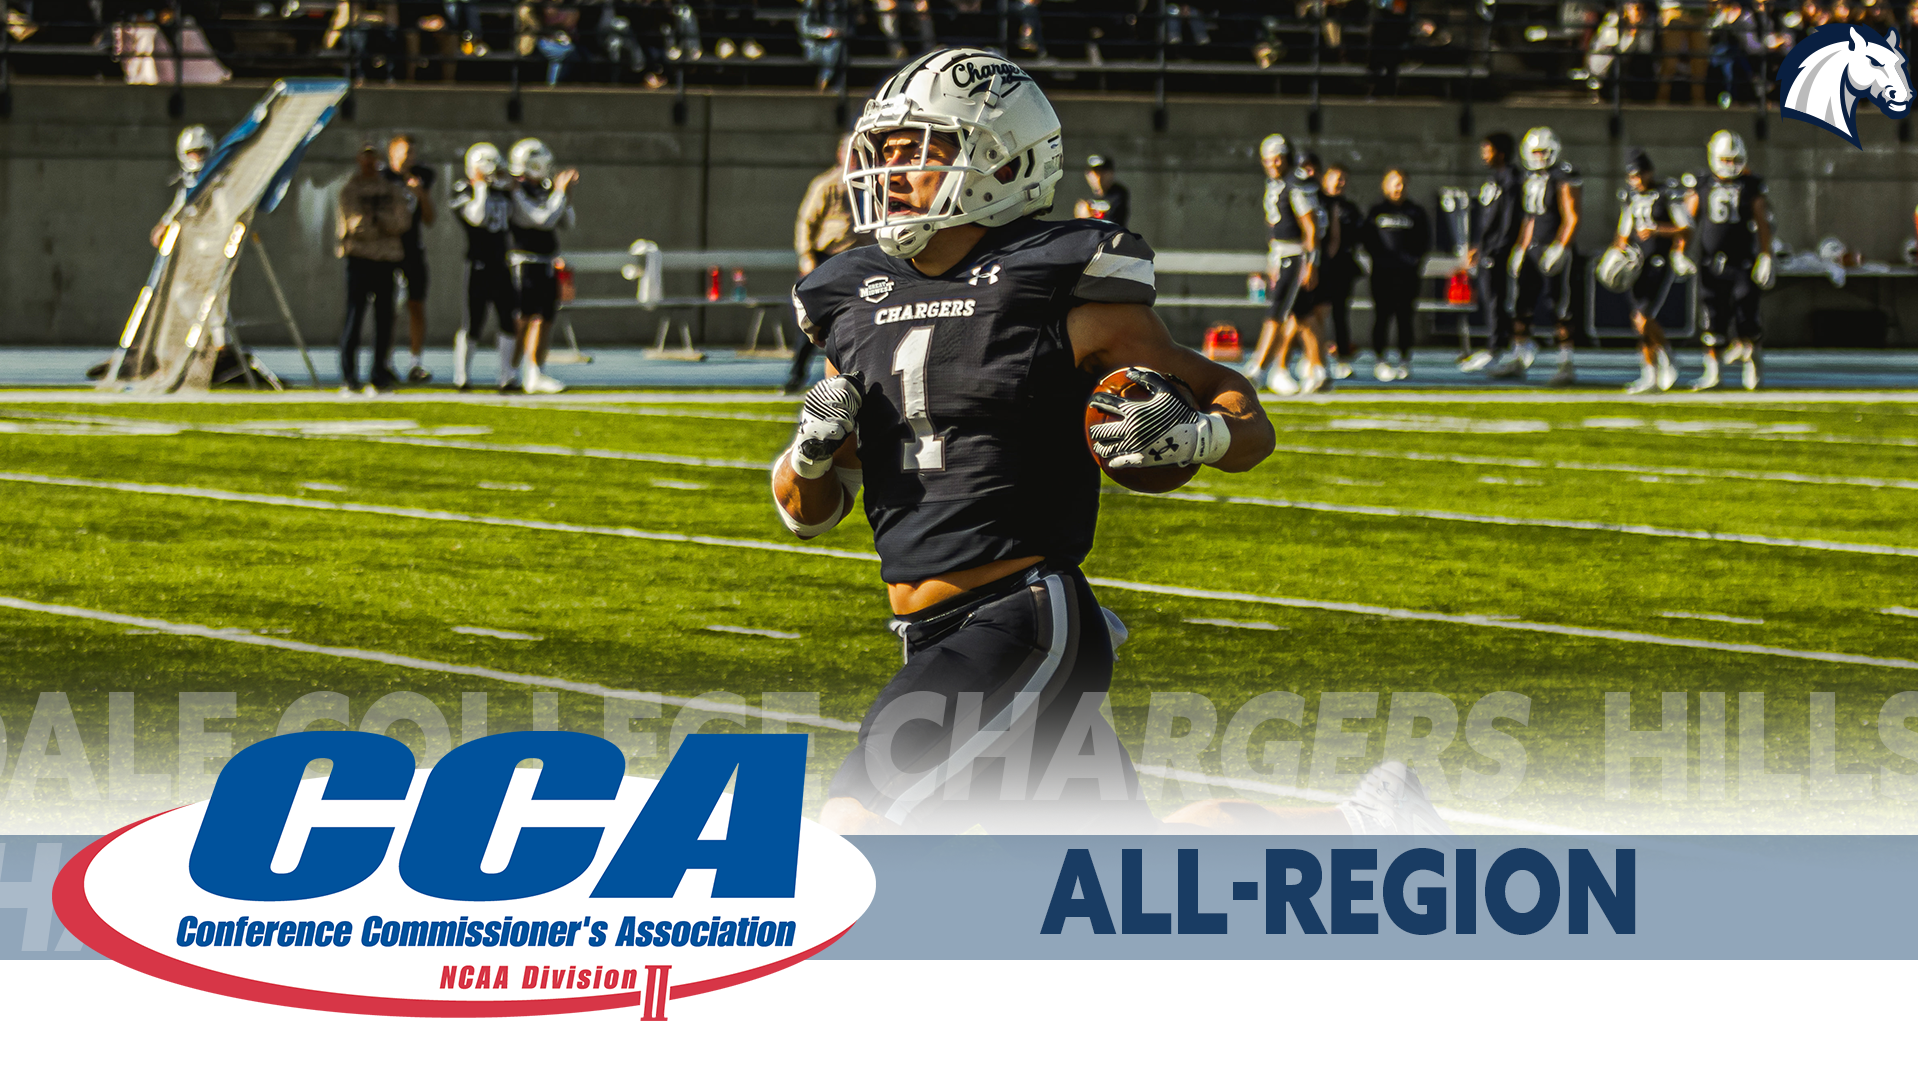 Chargers' Michael Herzog earns D2CCA first team All-Region honors